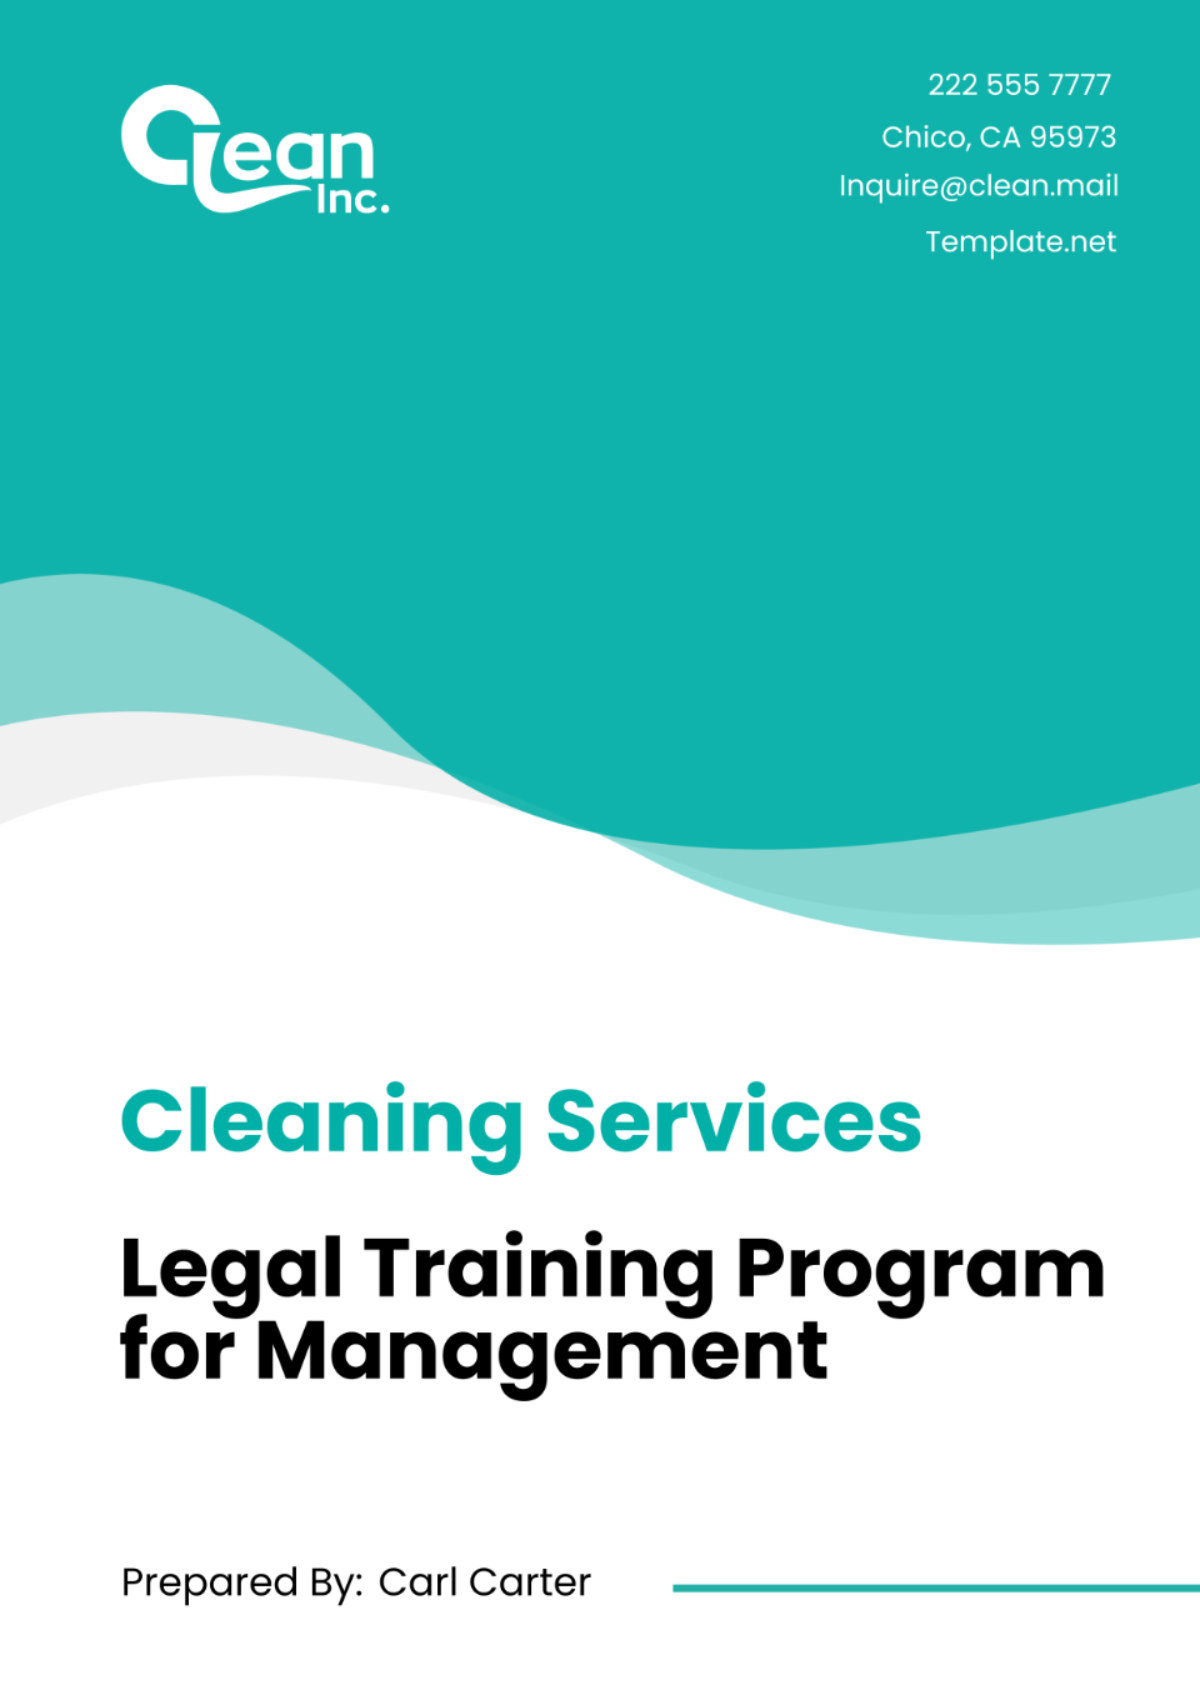 Cleaning Services Legal Training Program for Management Template